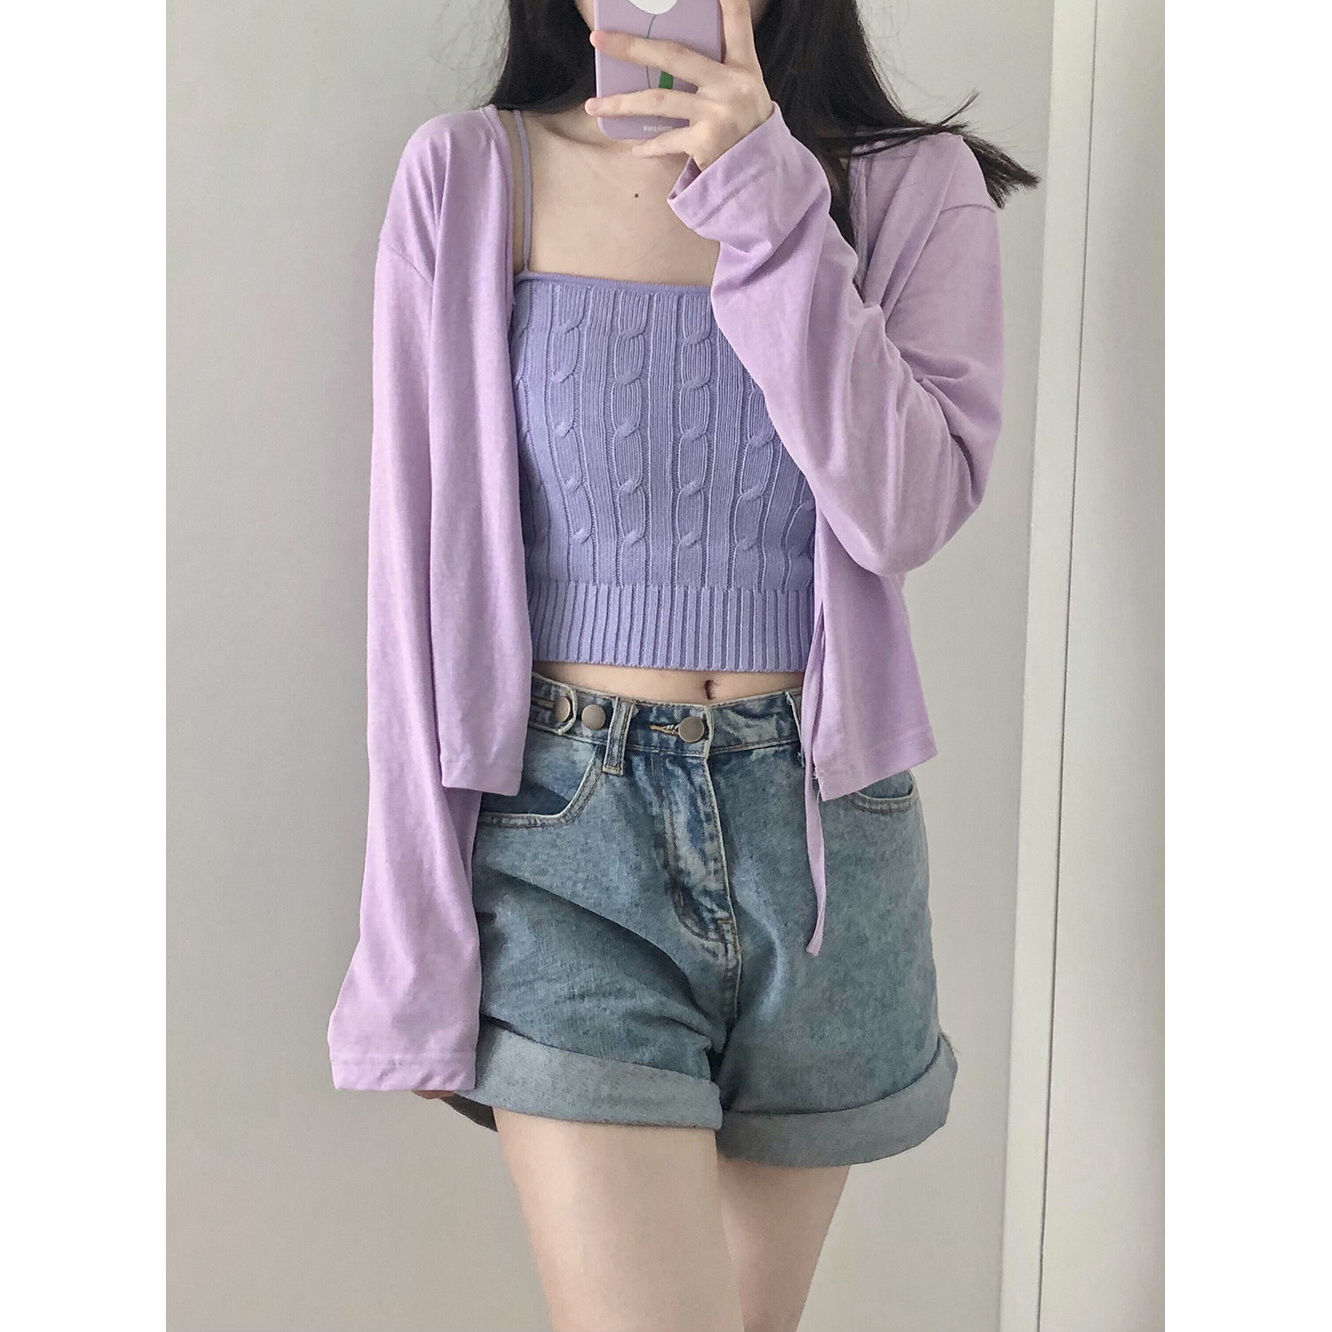 Lace-up Small Cardigan Long Sleeves Outer Match Lightweight Breathable Sun Protection Clothing Air Conditioning Shirt V-neck Cropped Coat Top Women's Summer